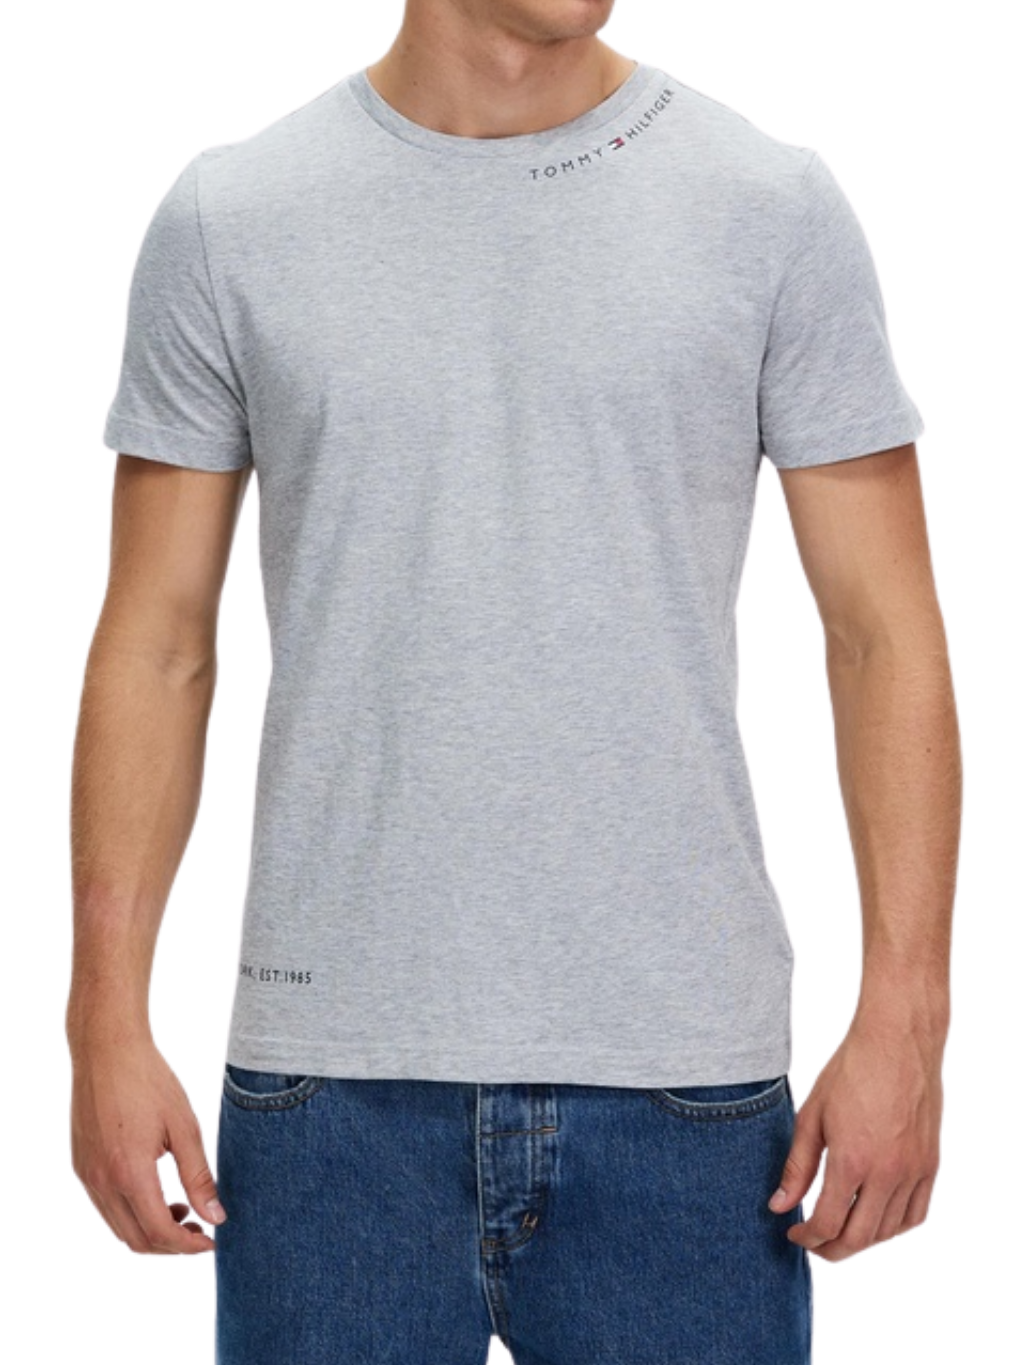 Tommy Hilfiger Multi Placement T-Shirt